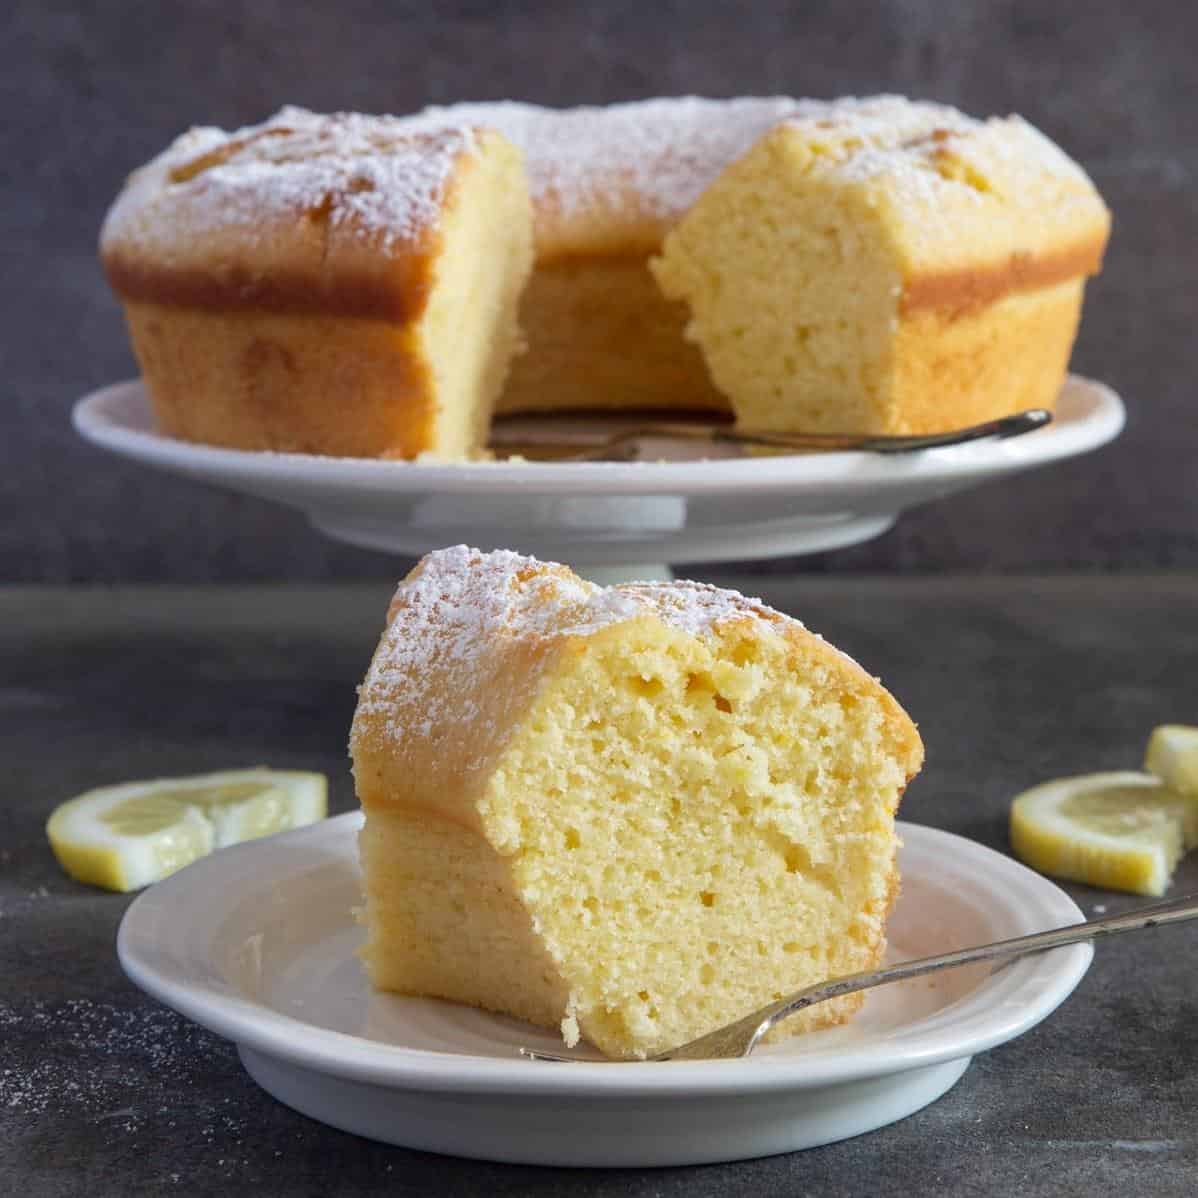  The perfect cake for lemon lovers!